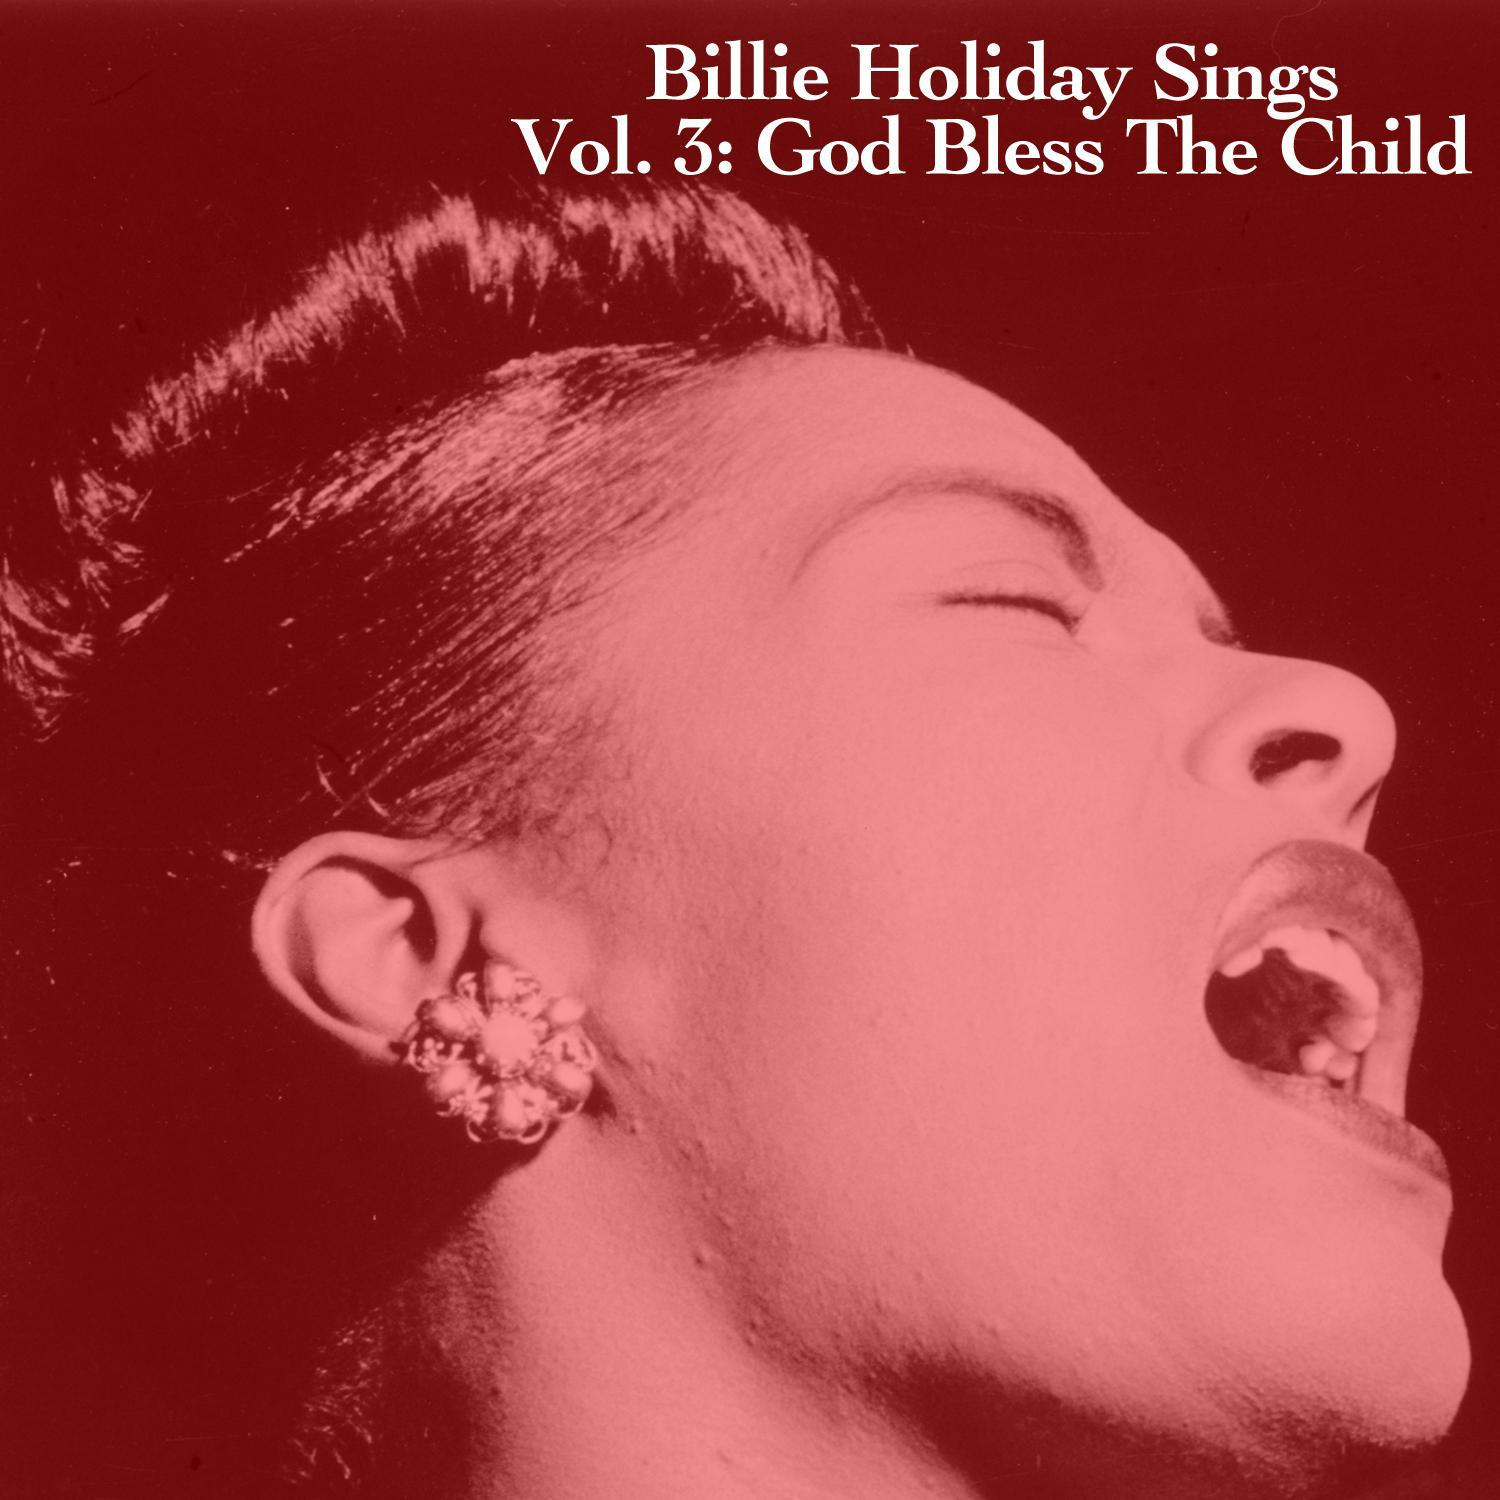 Billie Holiday Sings, Vol. 3: God Bless the Child